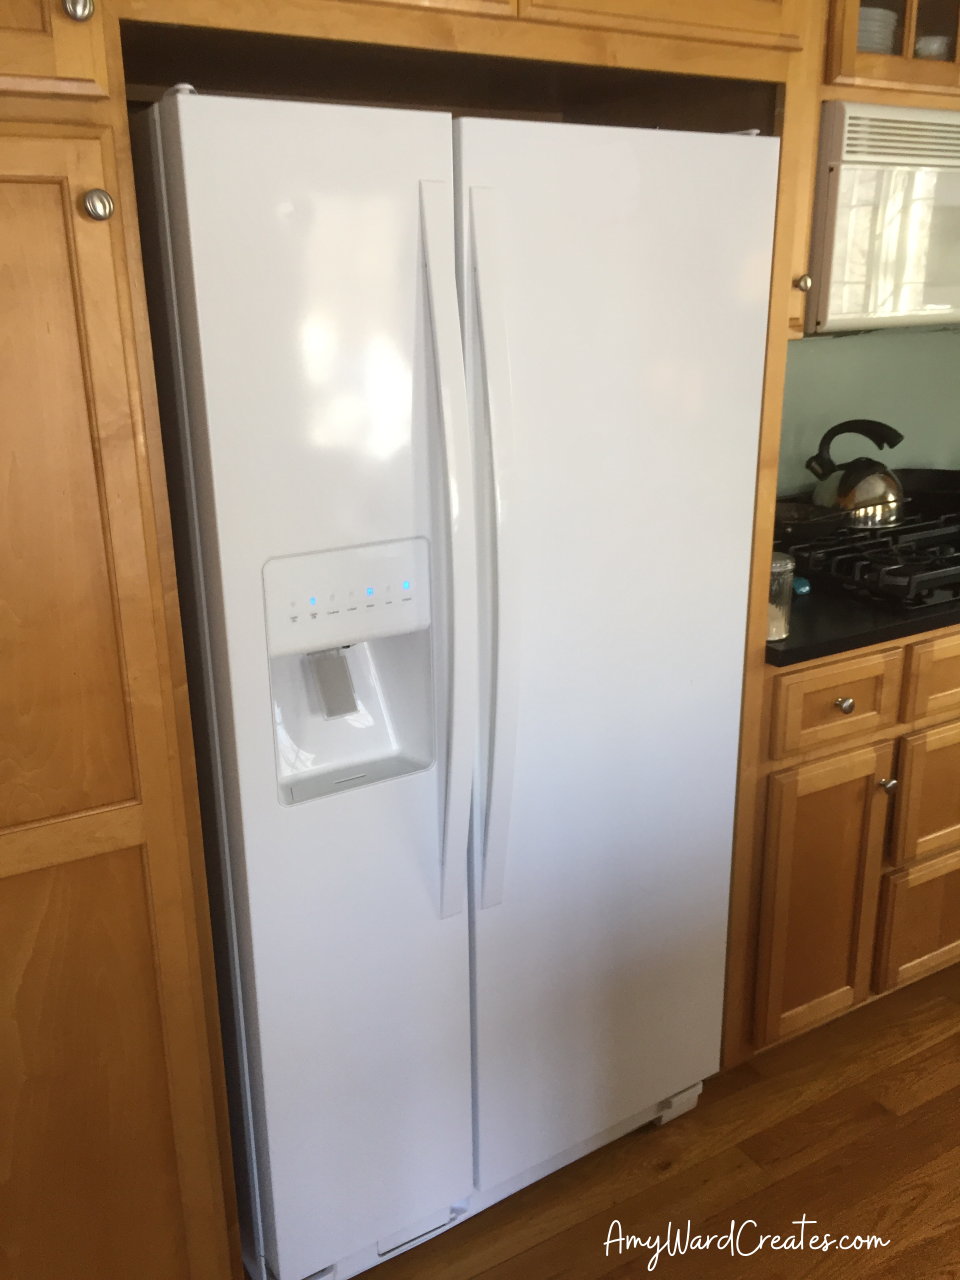 6 Ways to Achieve the Custom Look of a Built-In Refrigerator